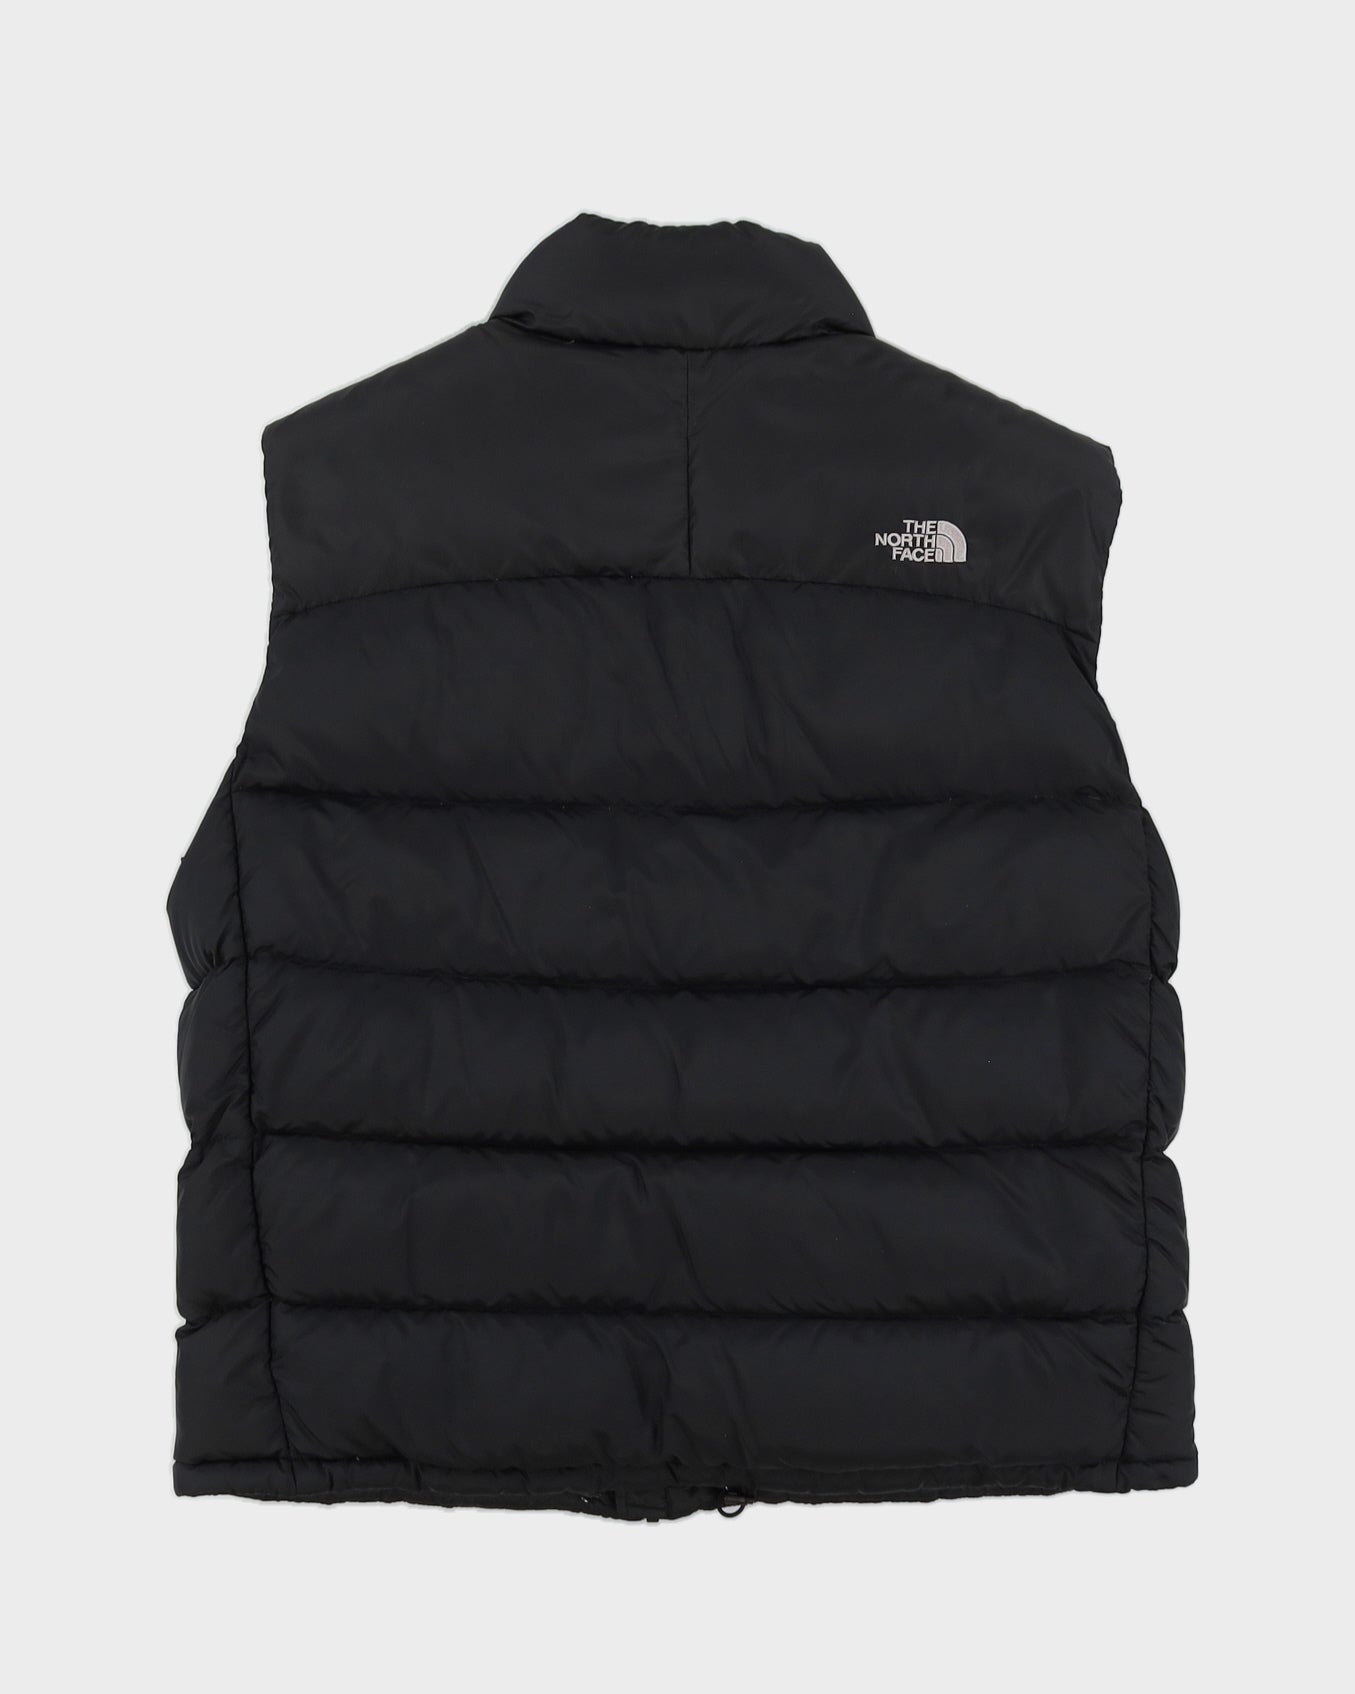 The North Face 700 Puffer Black Gilet - XL